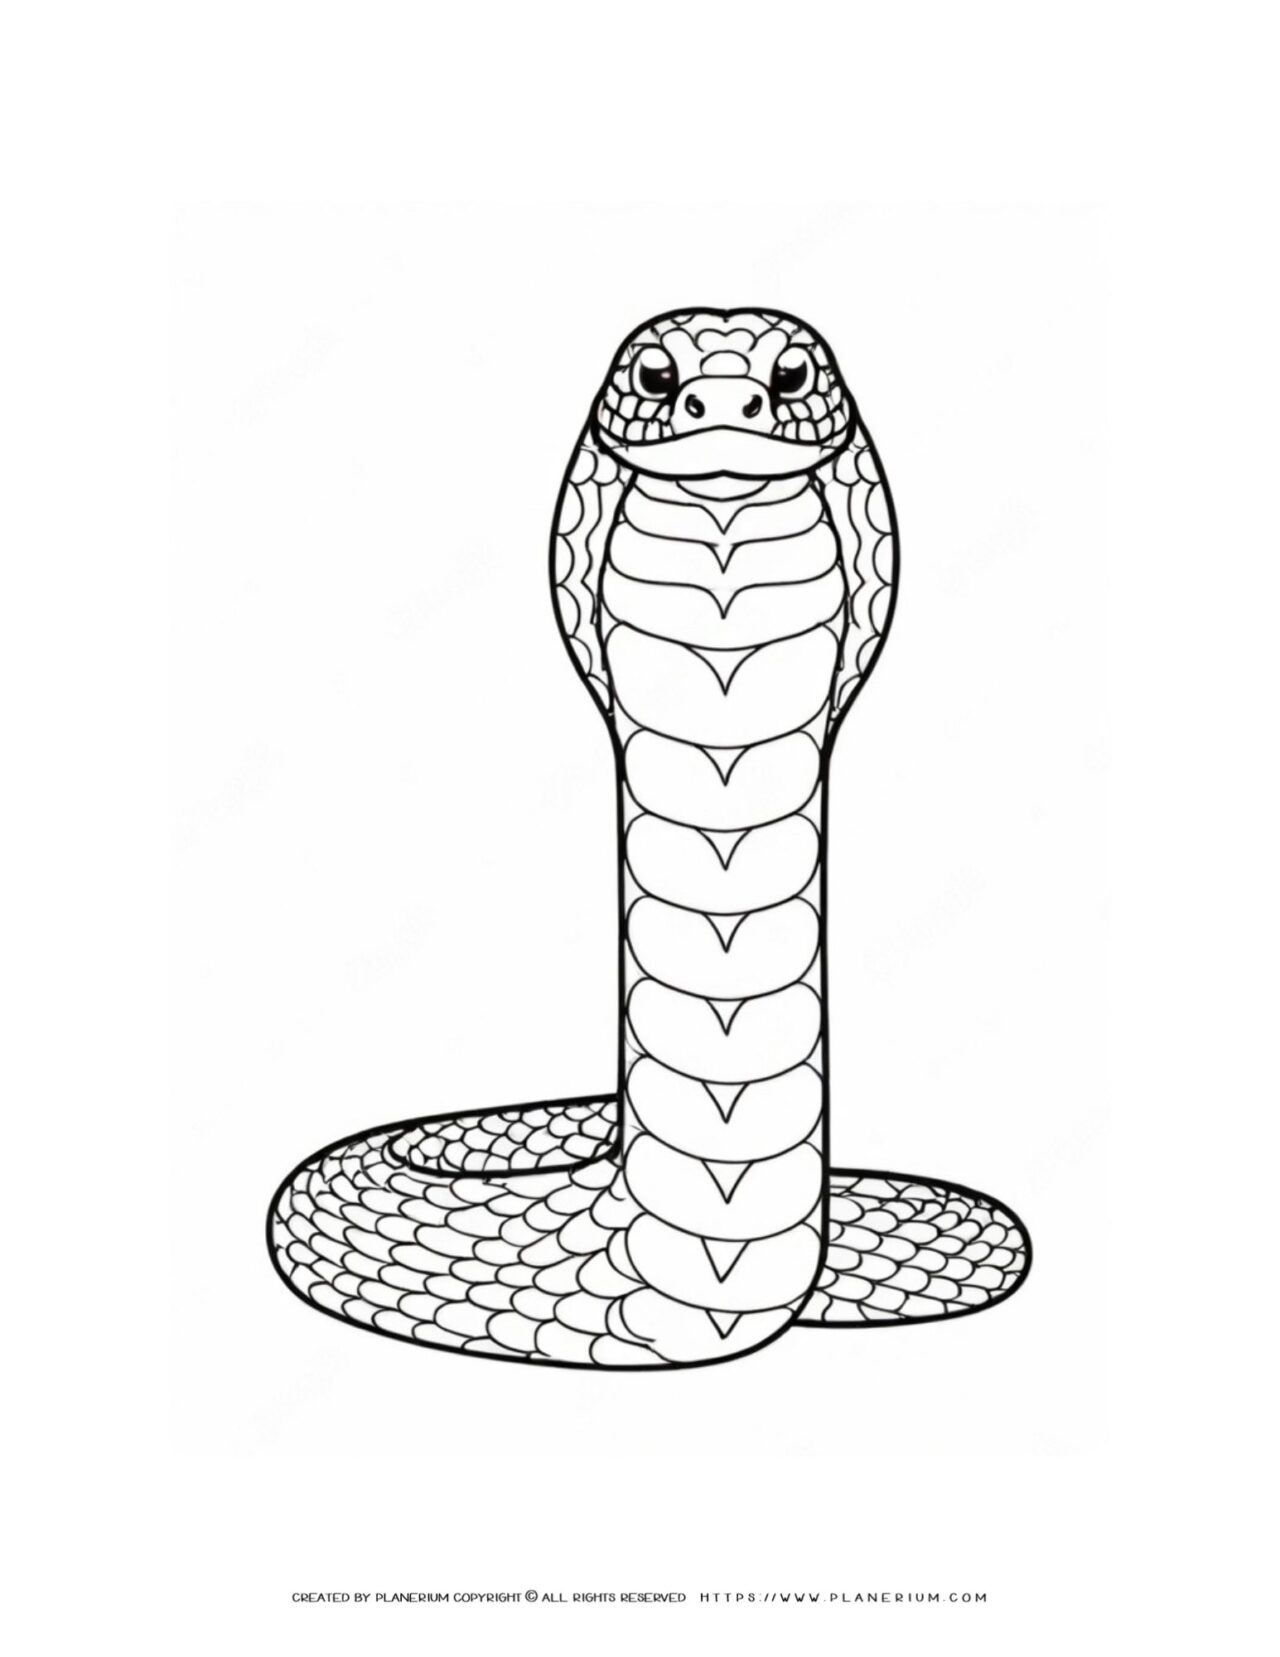 Detailed-Snake-Coloring-Page-for-Kids